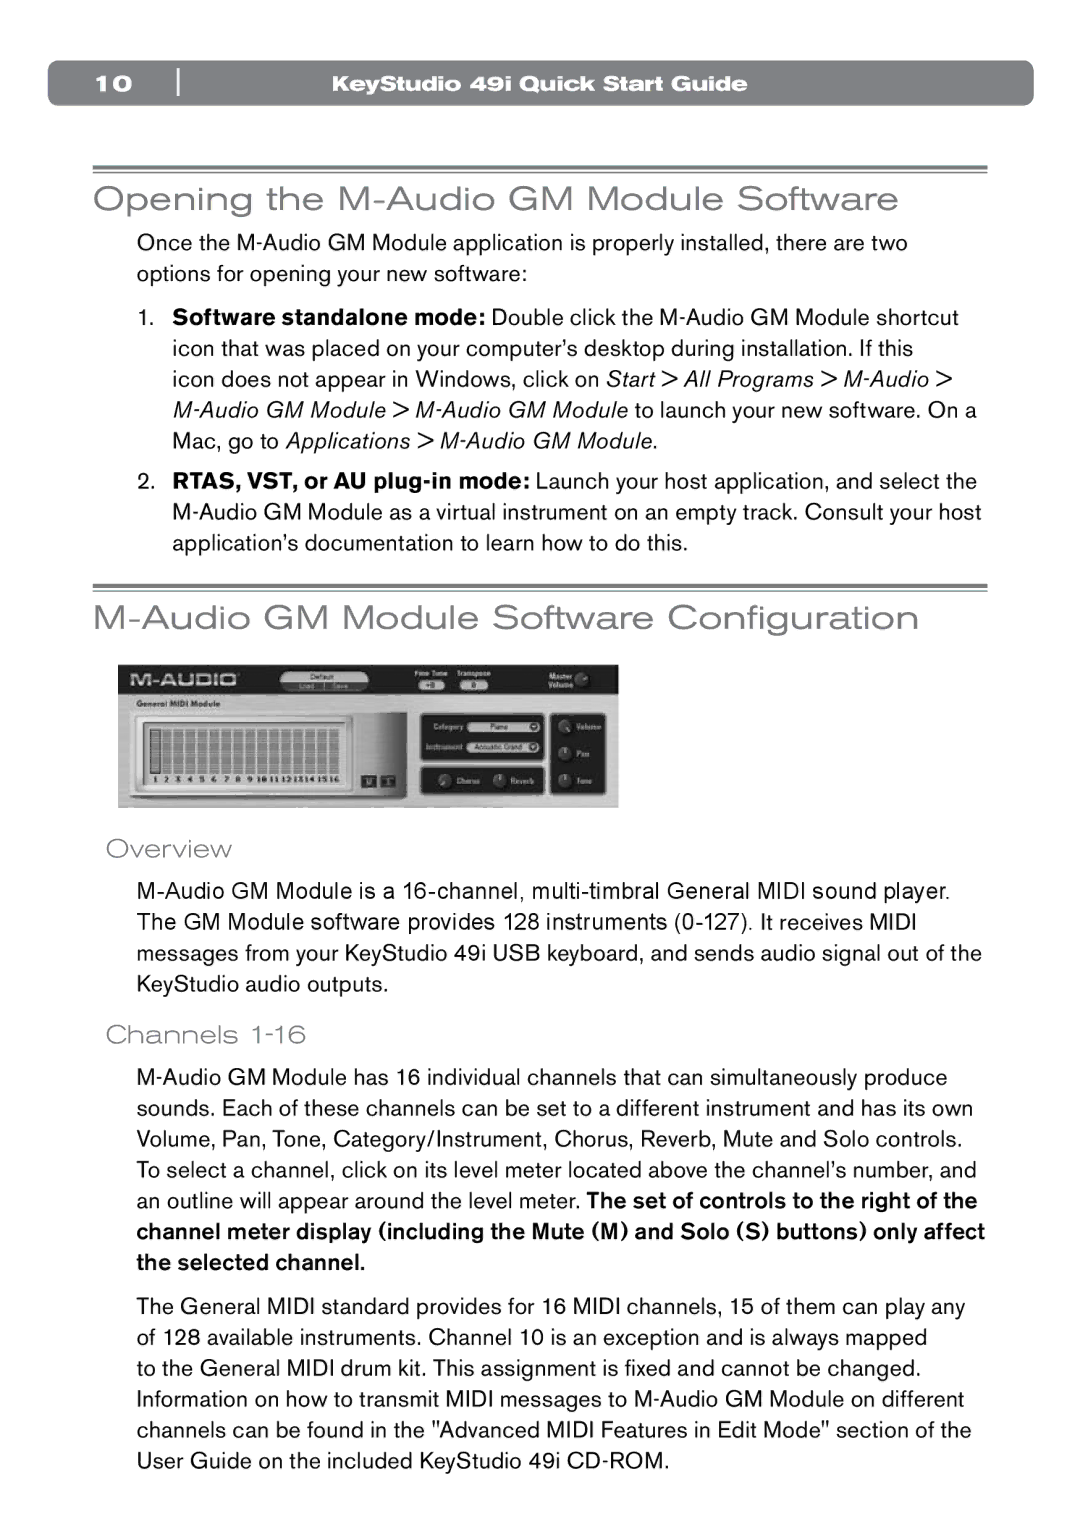 M-Audio 49i quick start Opening the M-Audio GM Module Software, Audio GM Module Software Configuration, Overview, Channels 